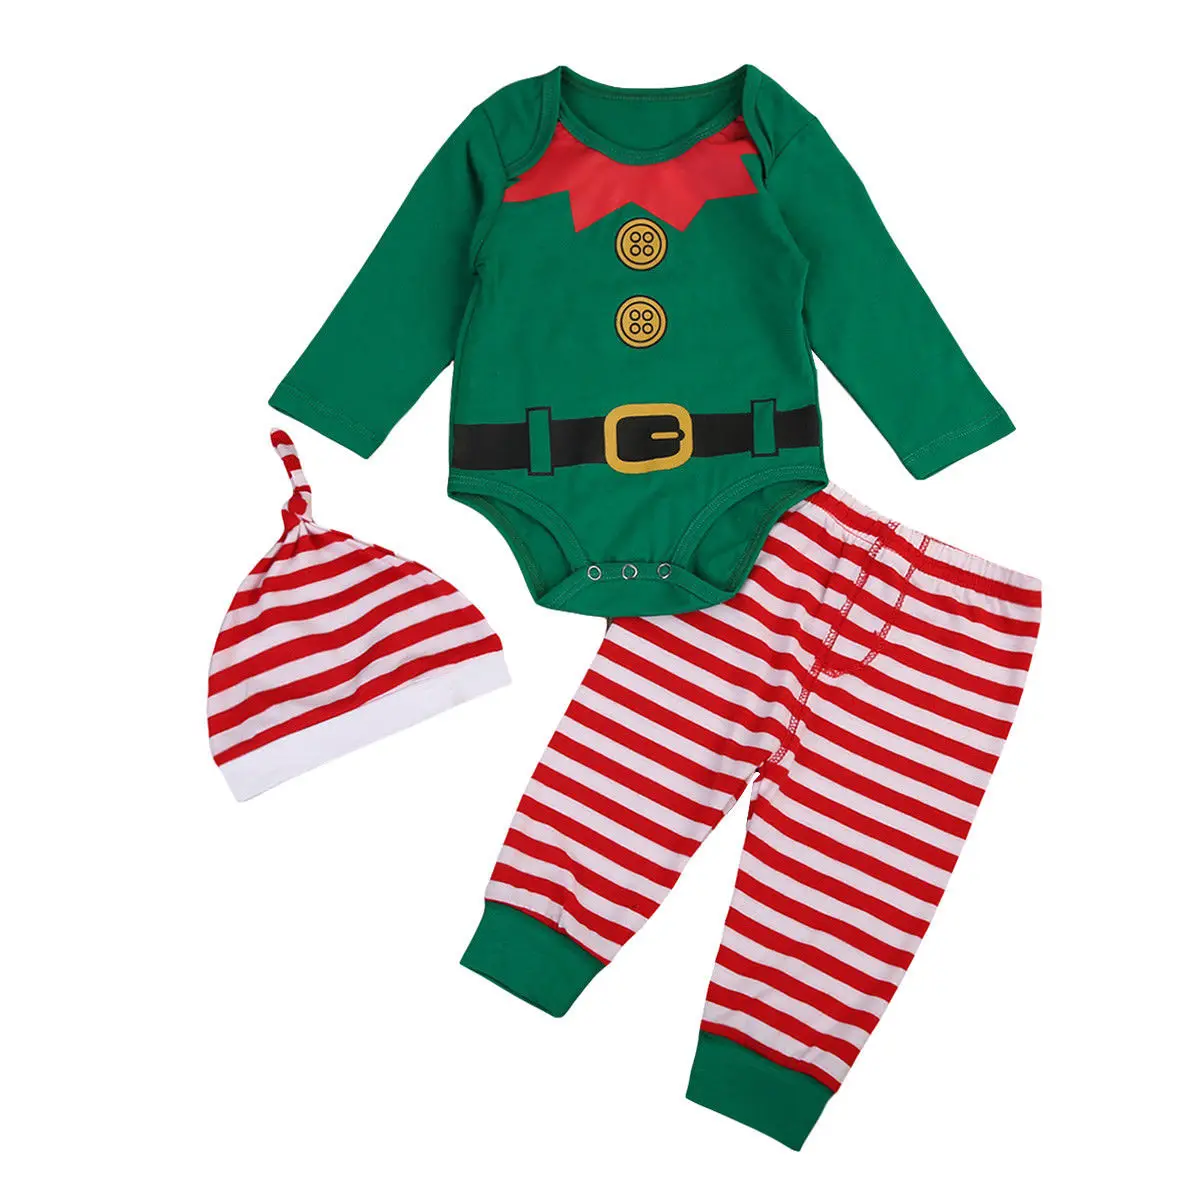 Xmas Toddler Baby Boys Girls Top Green Romper Red Striped Pants Leggings Outfits Clothes Christmas Set ZX